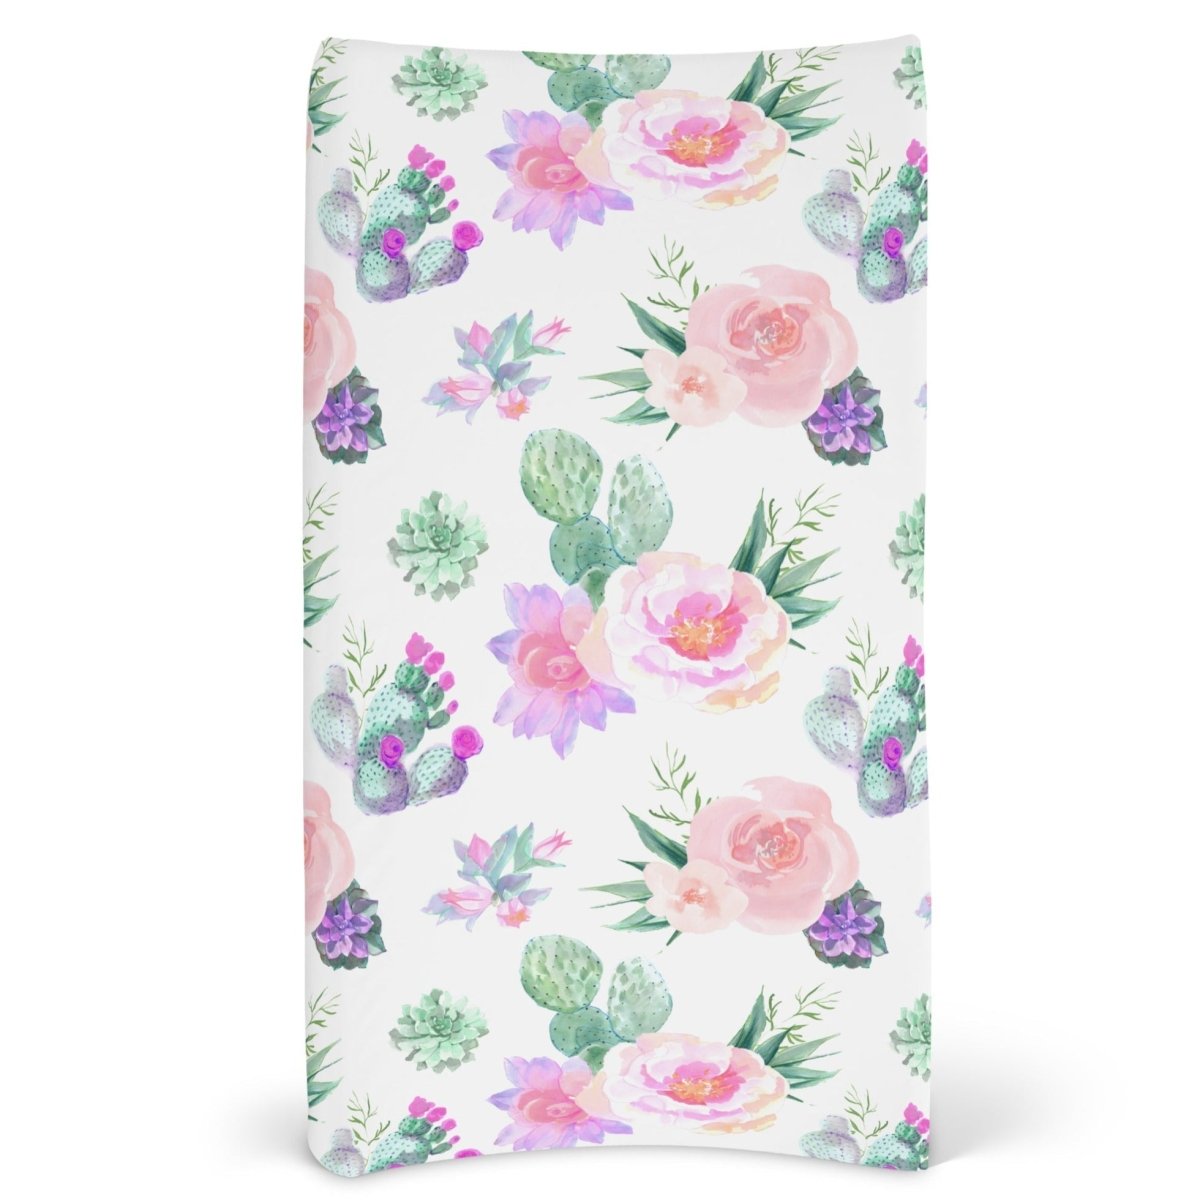 Cactus Floral Changing Pad Cover